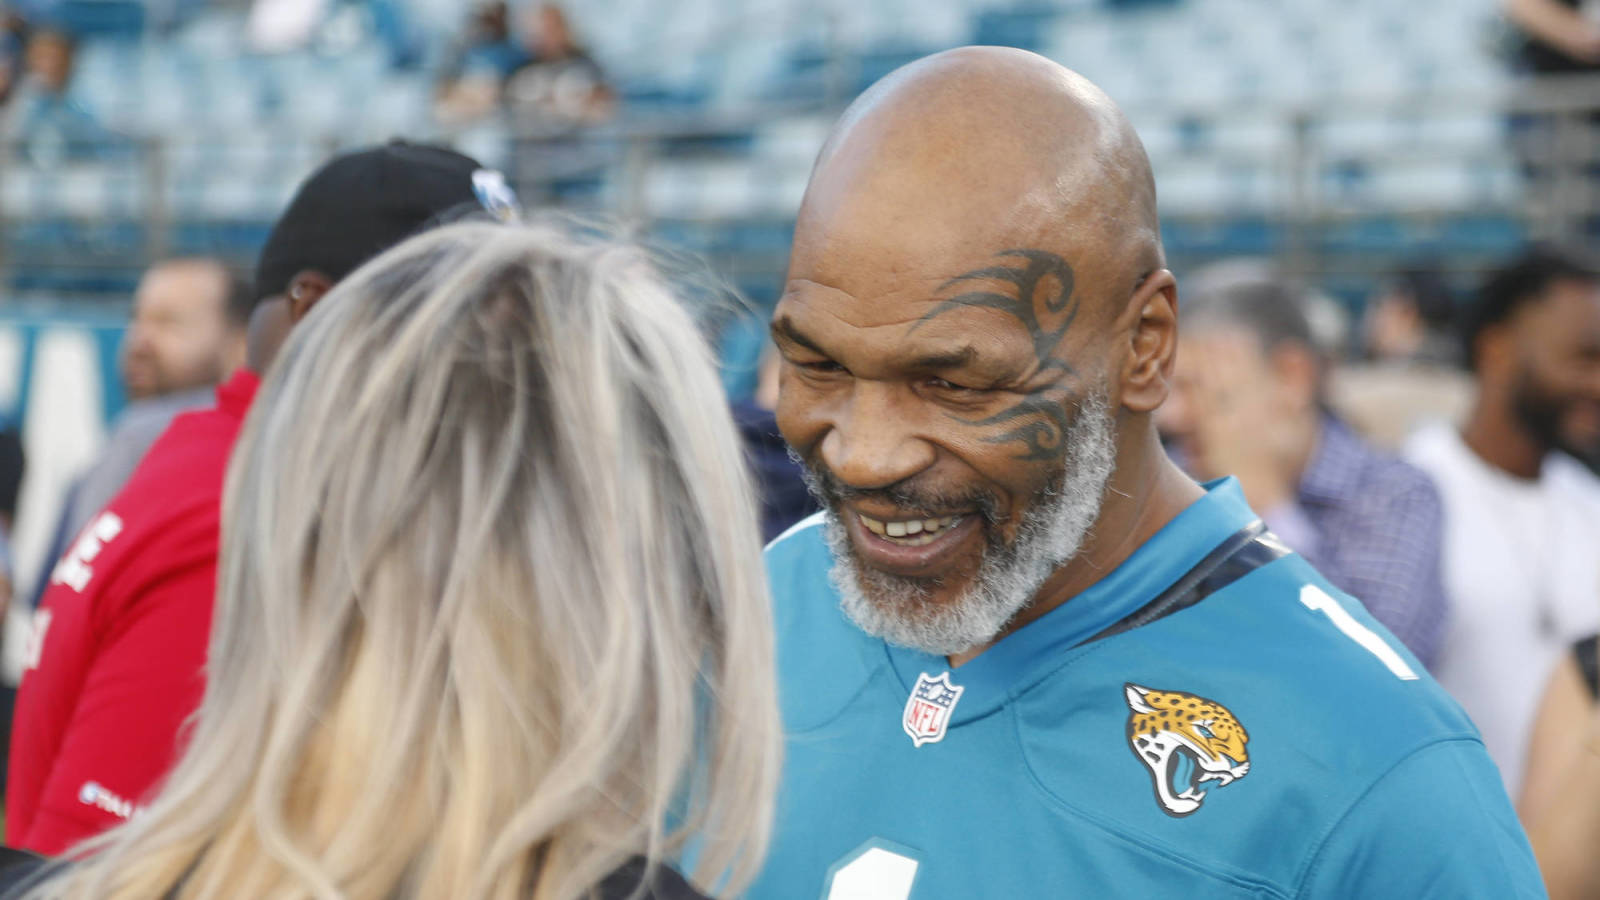 Mike Tyson attends Jaguars game in teal 